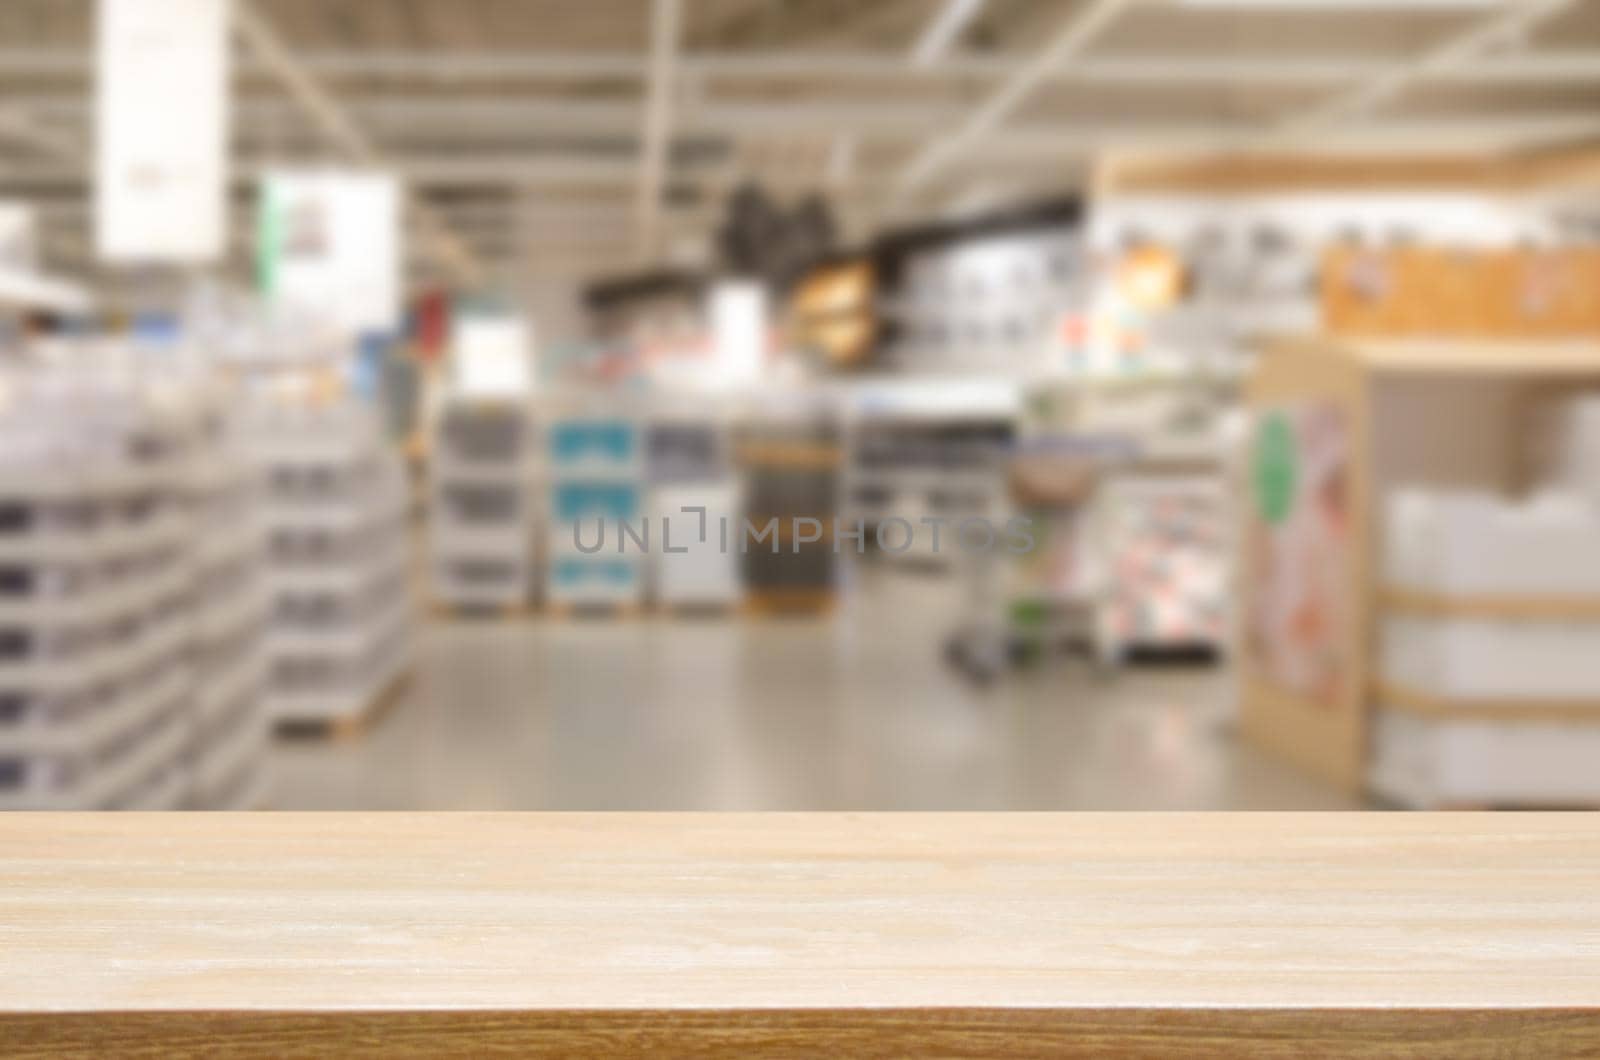 wood table top shelf product counter blank good blur background shopping mall business display. by aoo3771